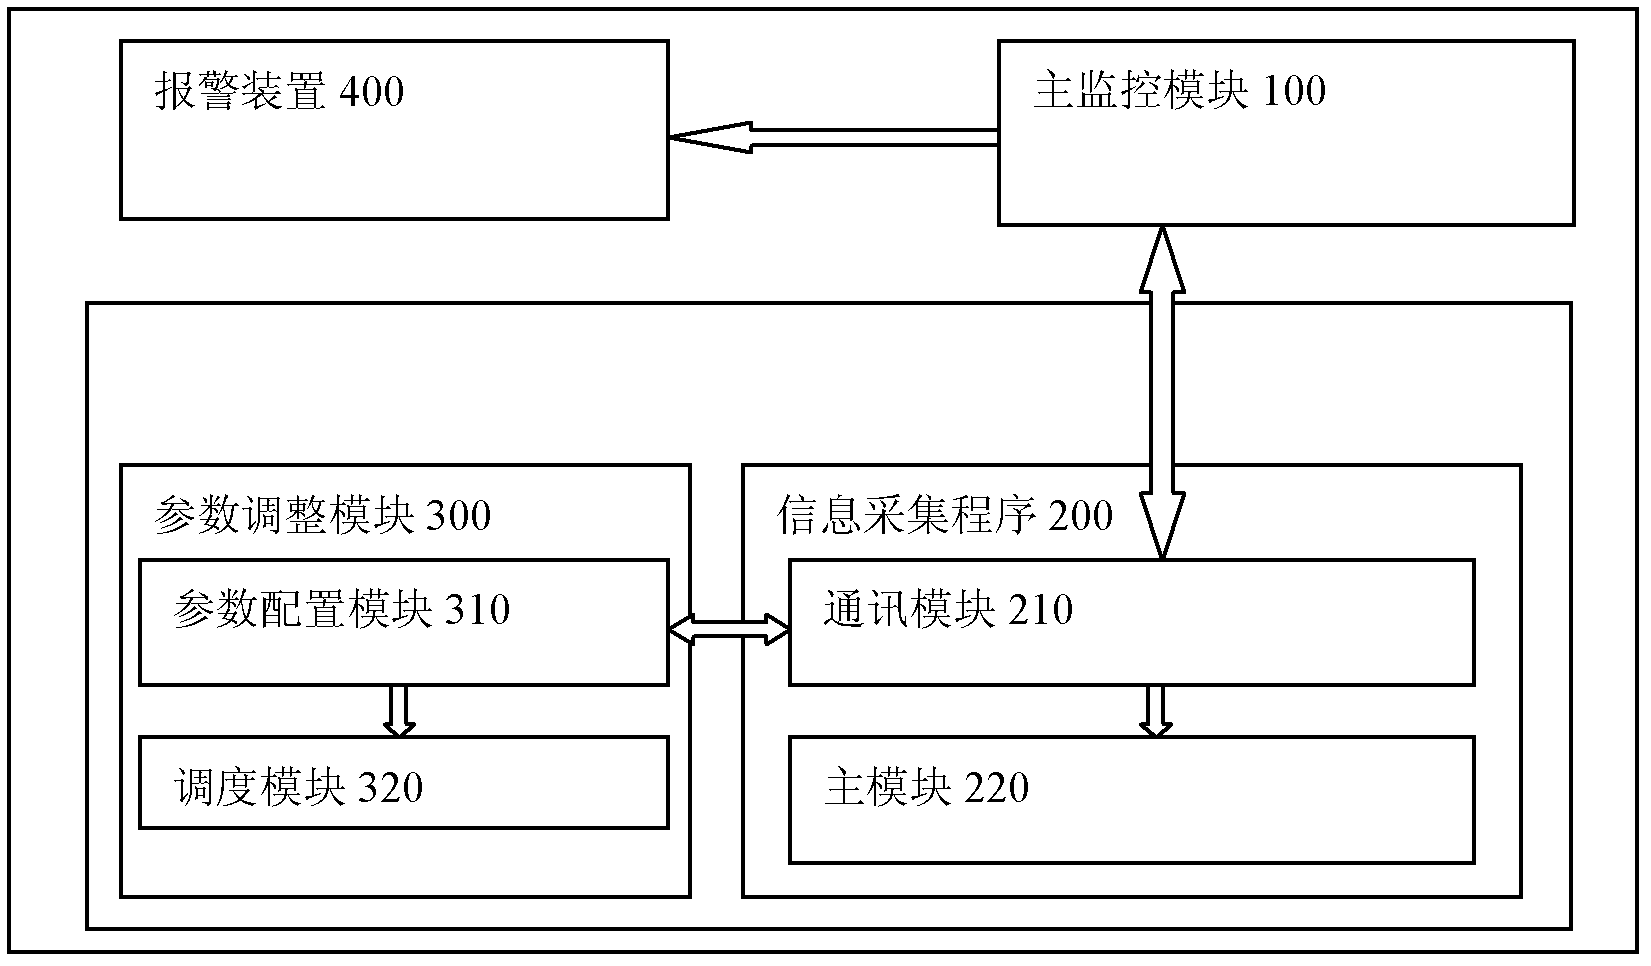 Computer cluster monitoring method and system thereof